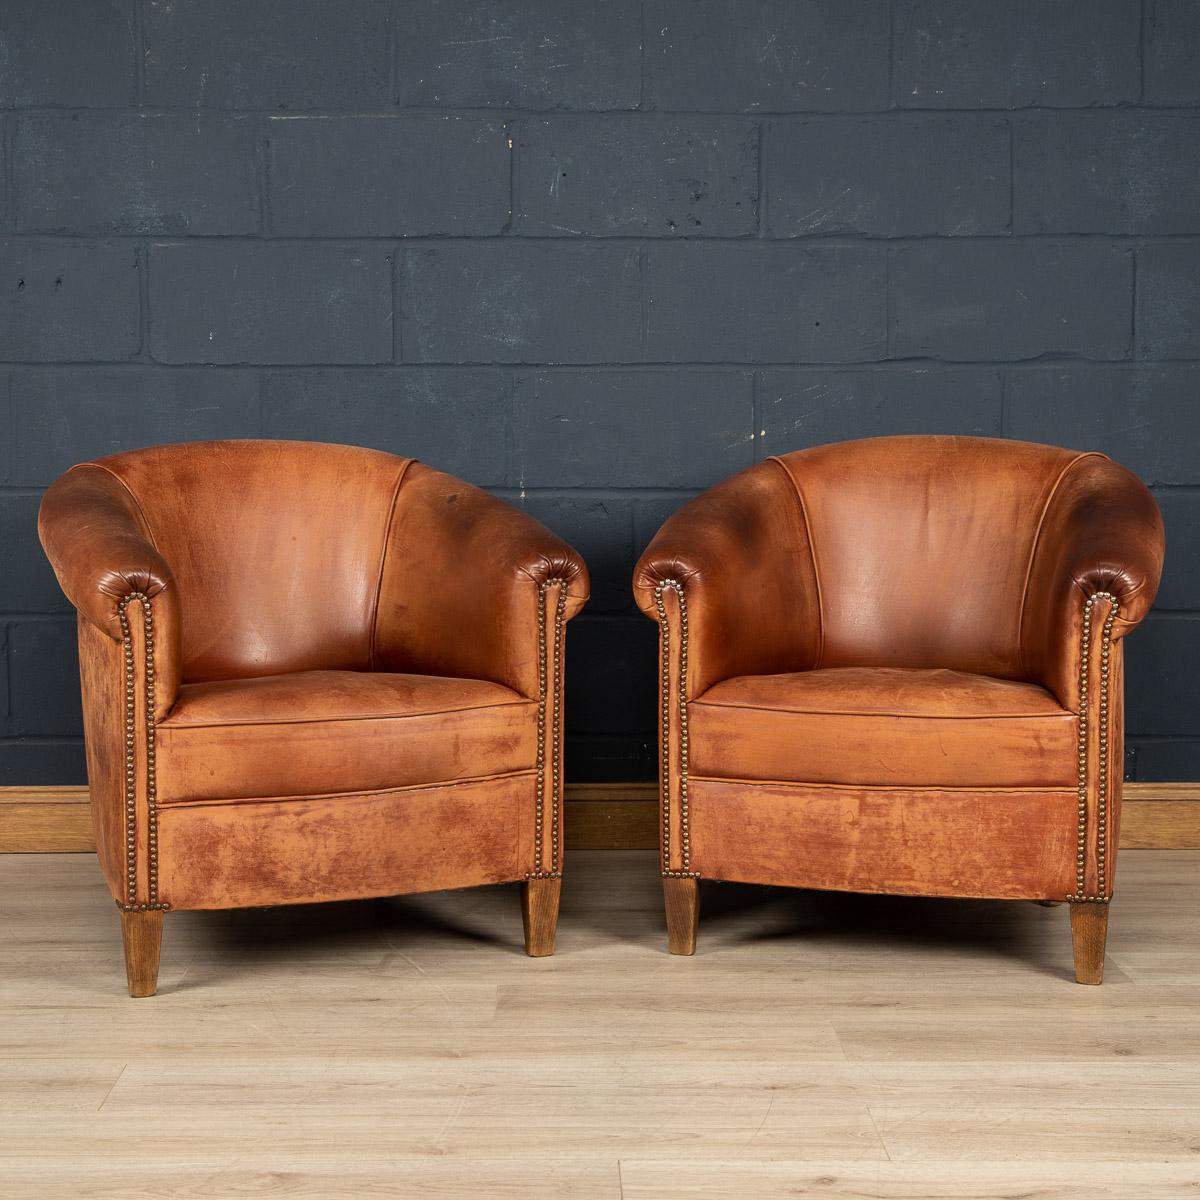 Showing superb patina and colour, this wonderful pair of club chairs were hand upholstered sheepskin leather in Holland by the finest craftsmen in the latter part of the 20th century.

Condition
In good condition - some wear consistent with